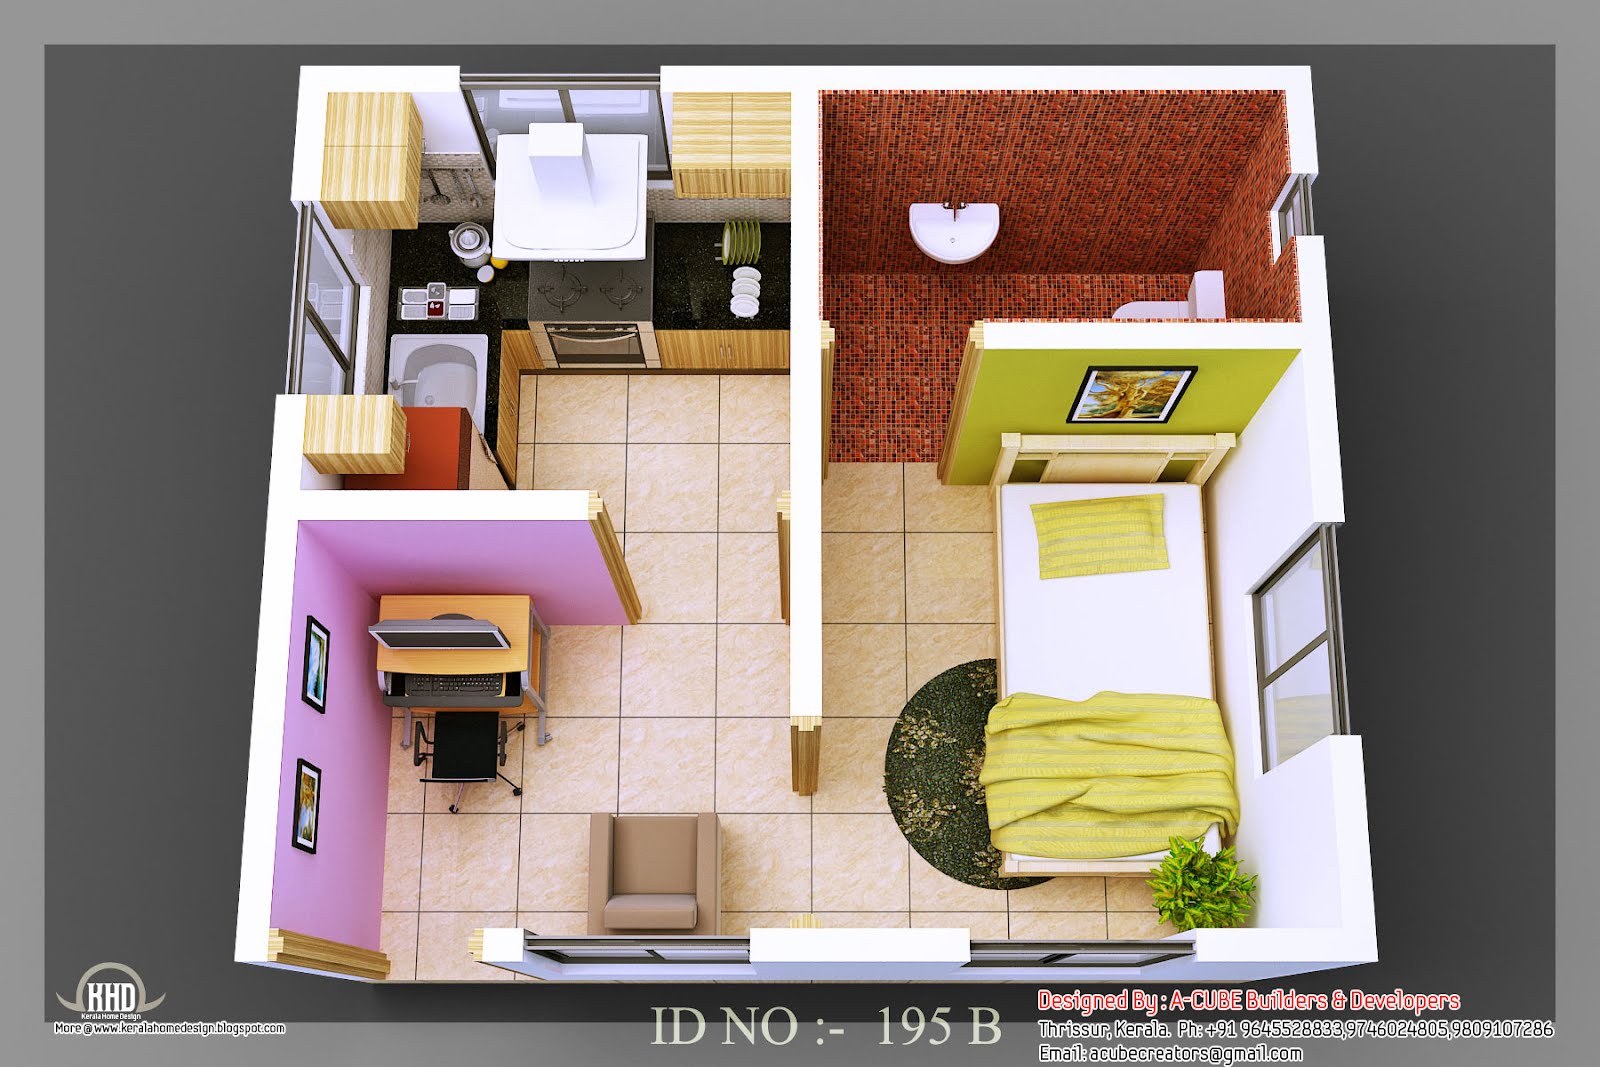  3D  isometric views  of small house  plans  home  appliance